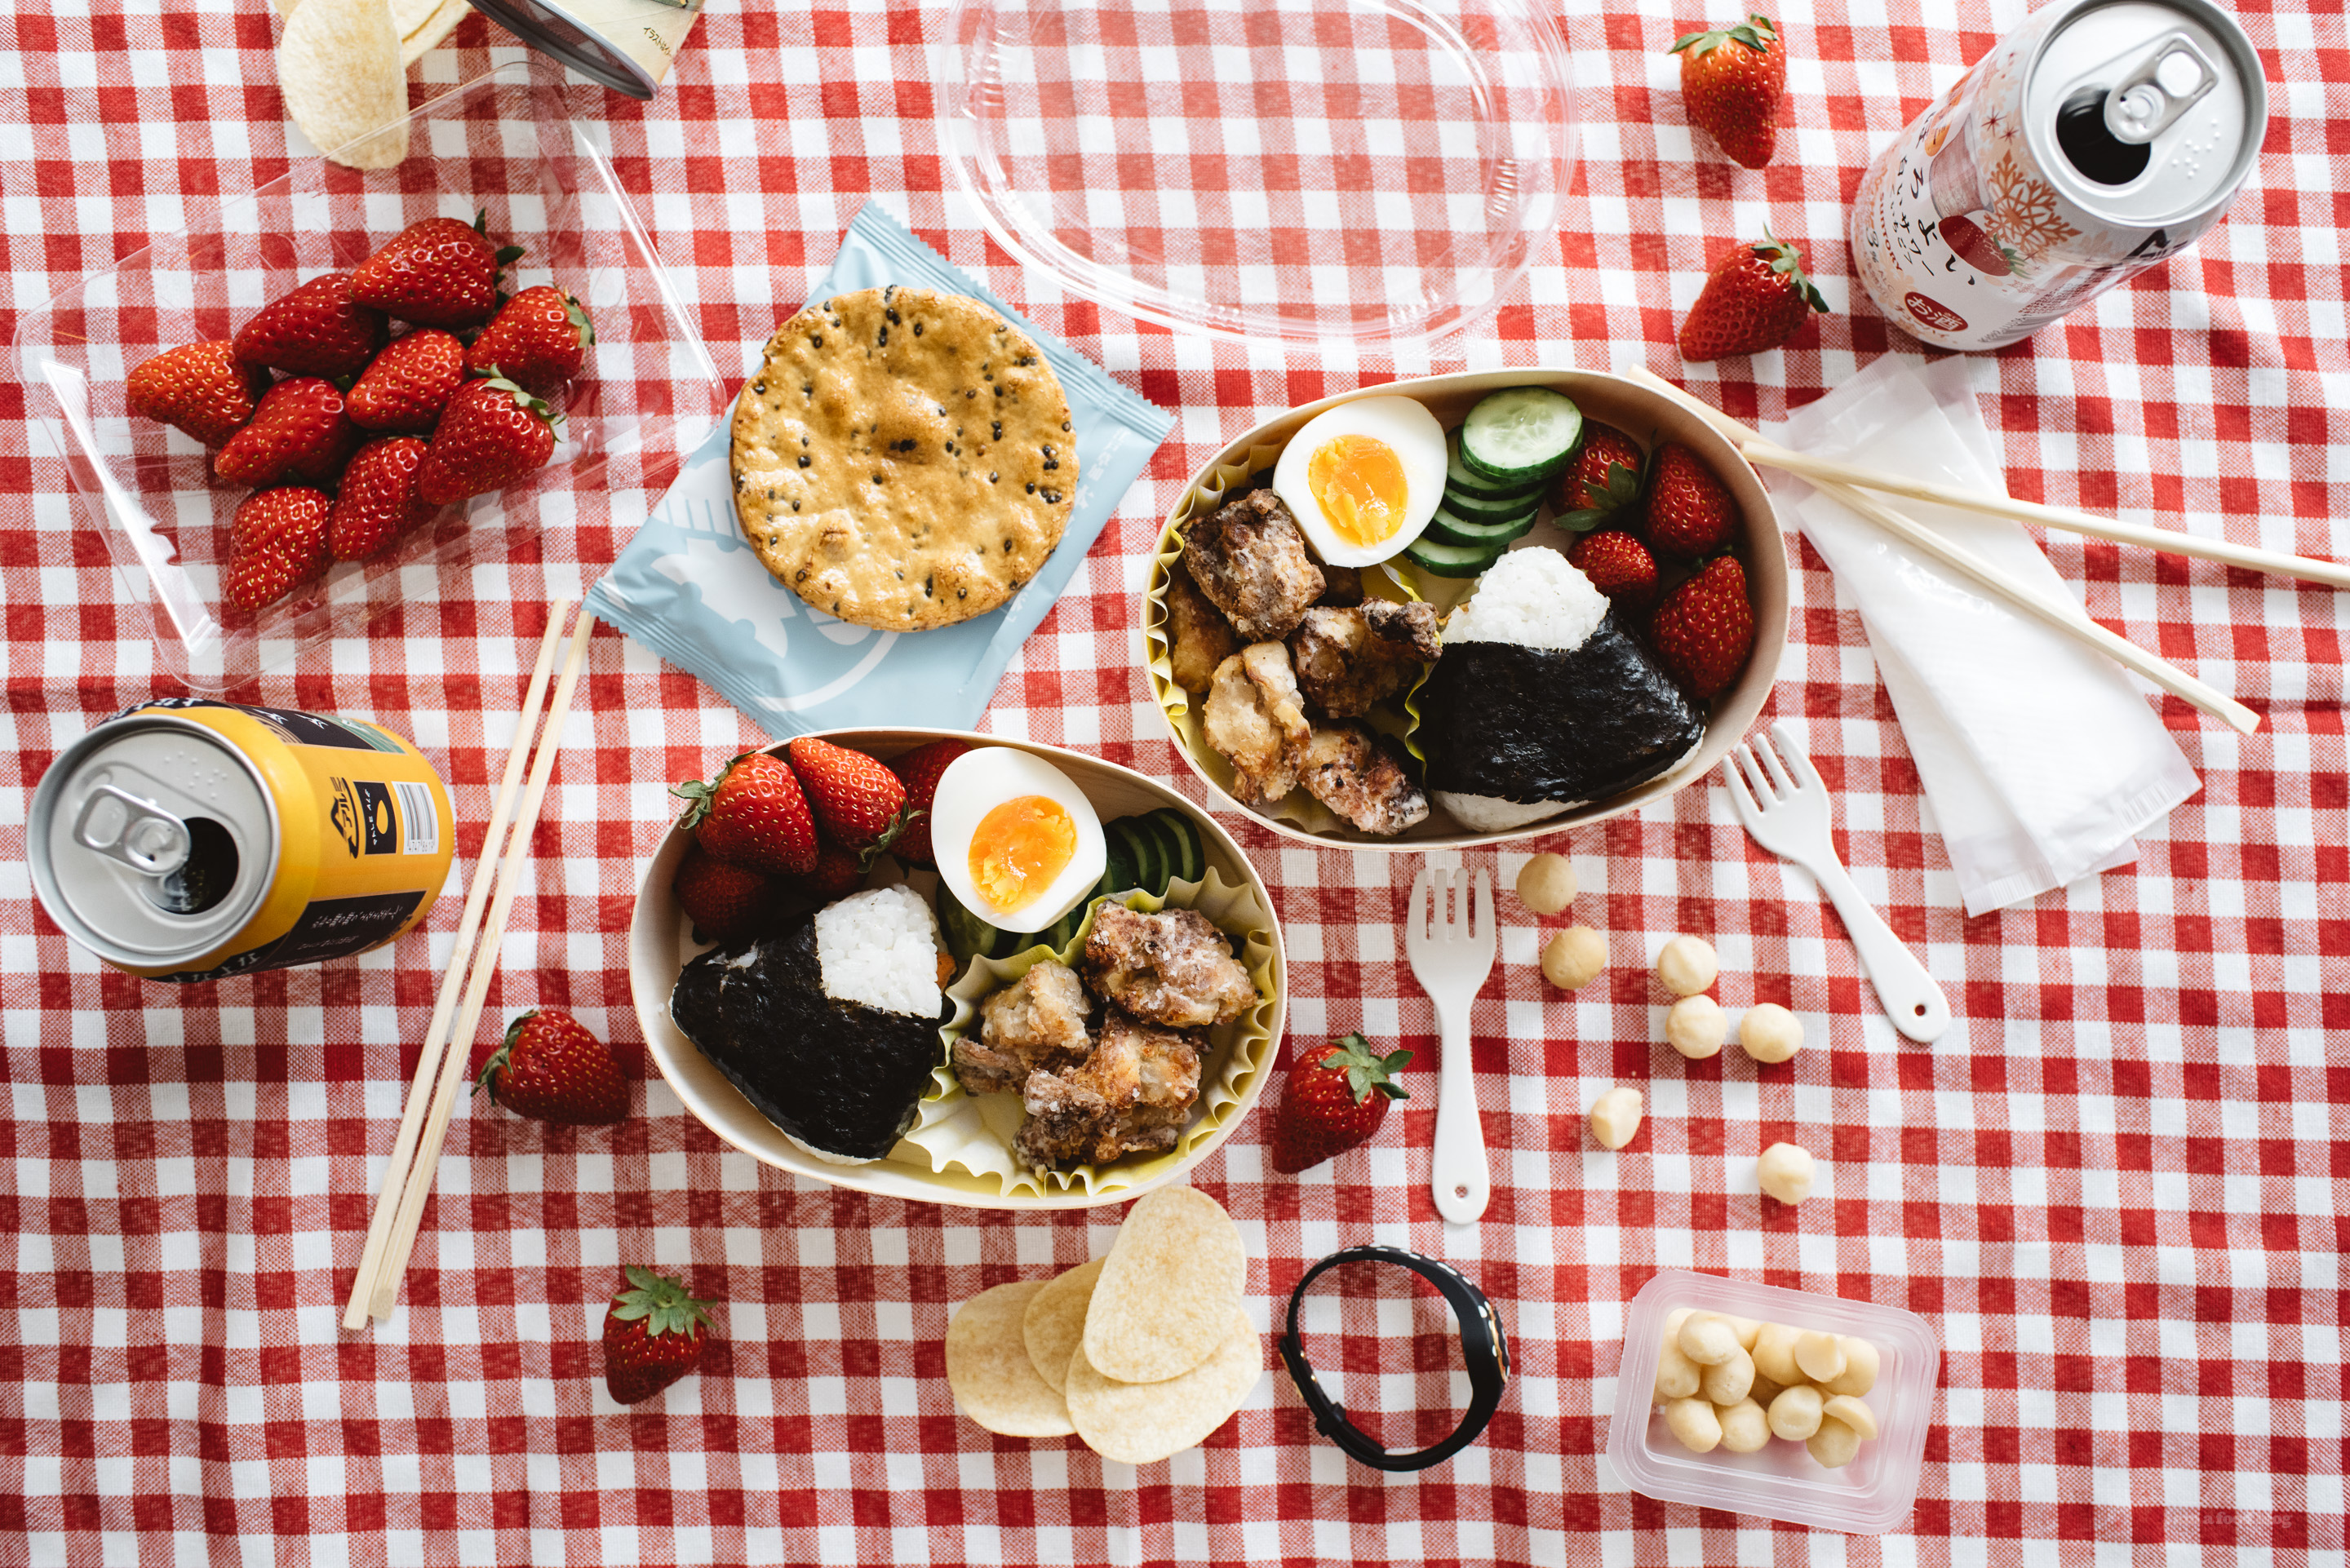 12 recipes for a Japanese inspired picnic